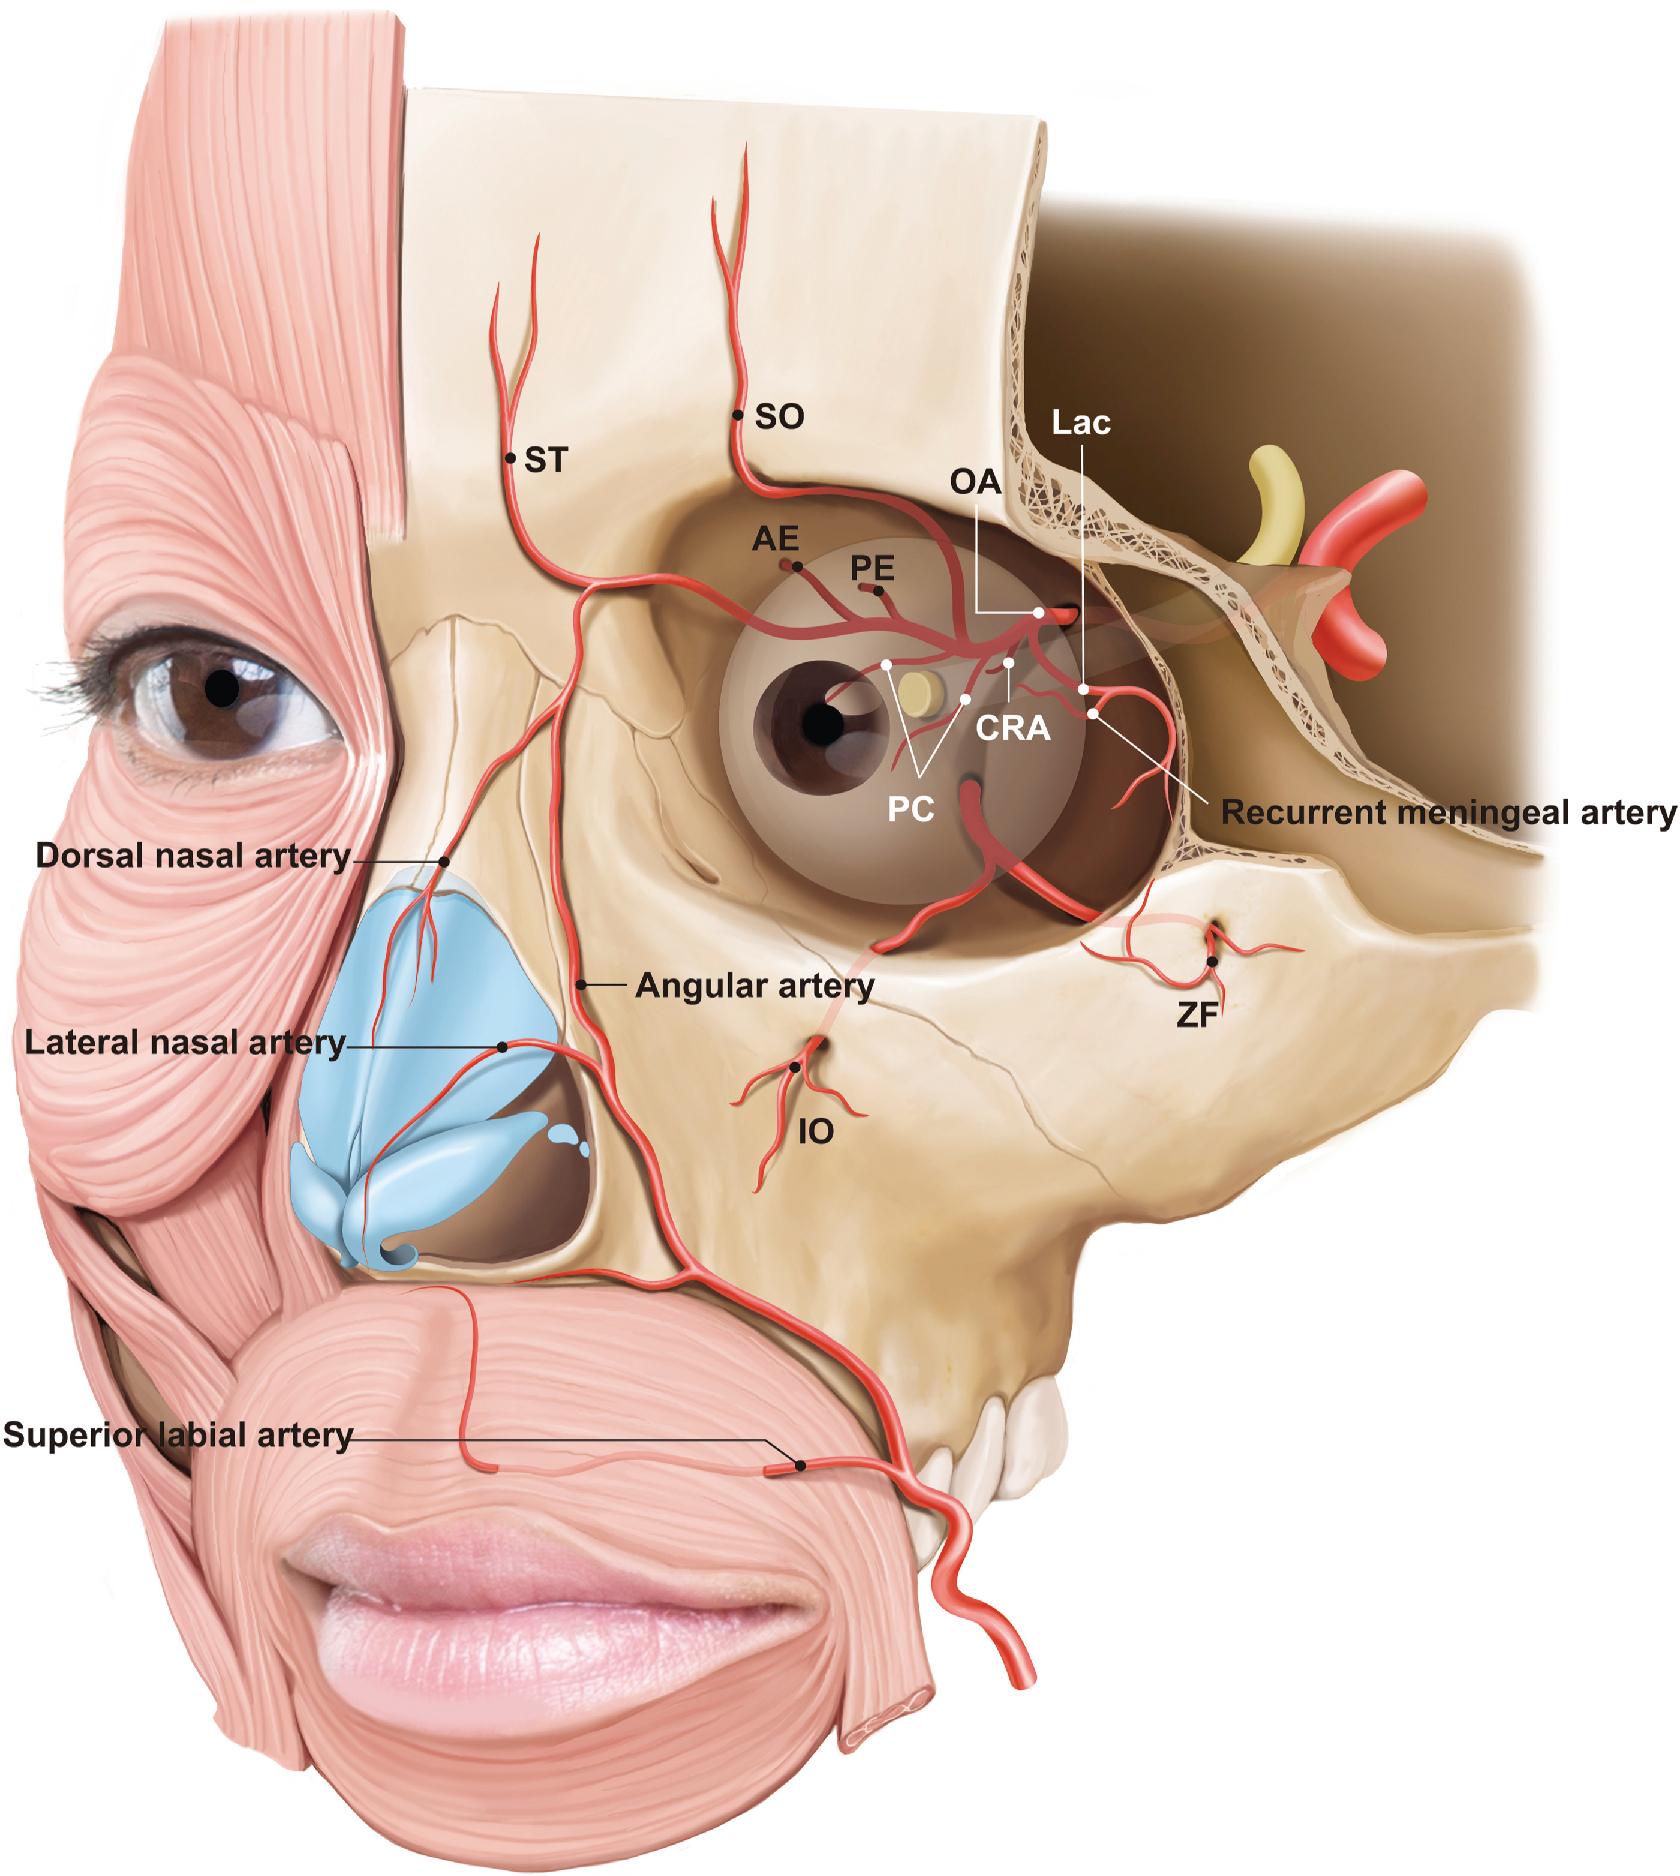 Fig. 36.1, The arterial supply of the face consists of vessels from both the internal and external carotid arteries. Of note is the communication between these two systems, which can lead to the devastating consequences of embolic events. AE , Anterior ethmoidal artery; CRA , central retinal artery; IO , infraorbital artery; LC , lacrimal artery; OA , ophthalmic artery; PC , posterior ciliary artery; PE , posterior ethmoidal artery; SO , supraorbital artery; ST , supratorchlear artery; ZF , zygomaticofacial artery.